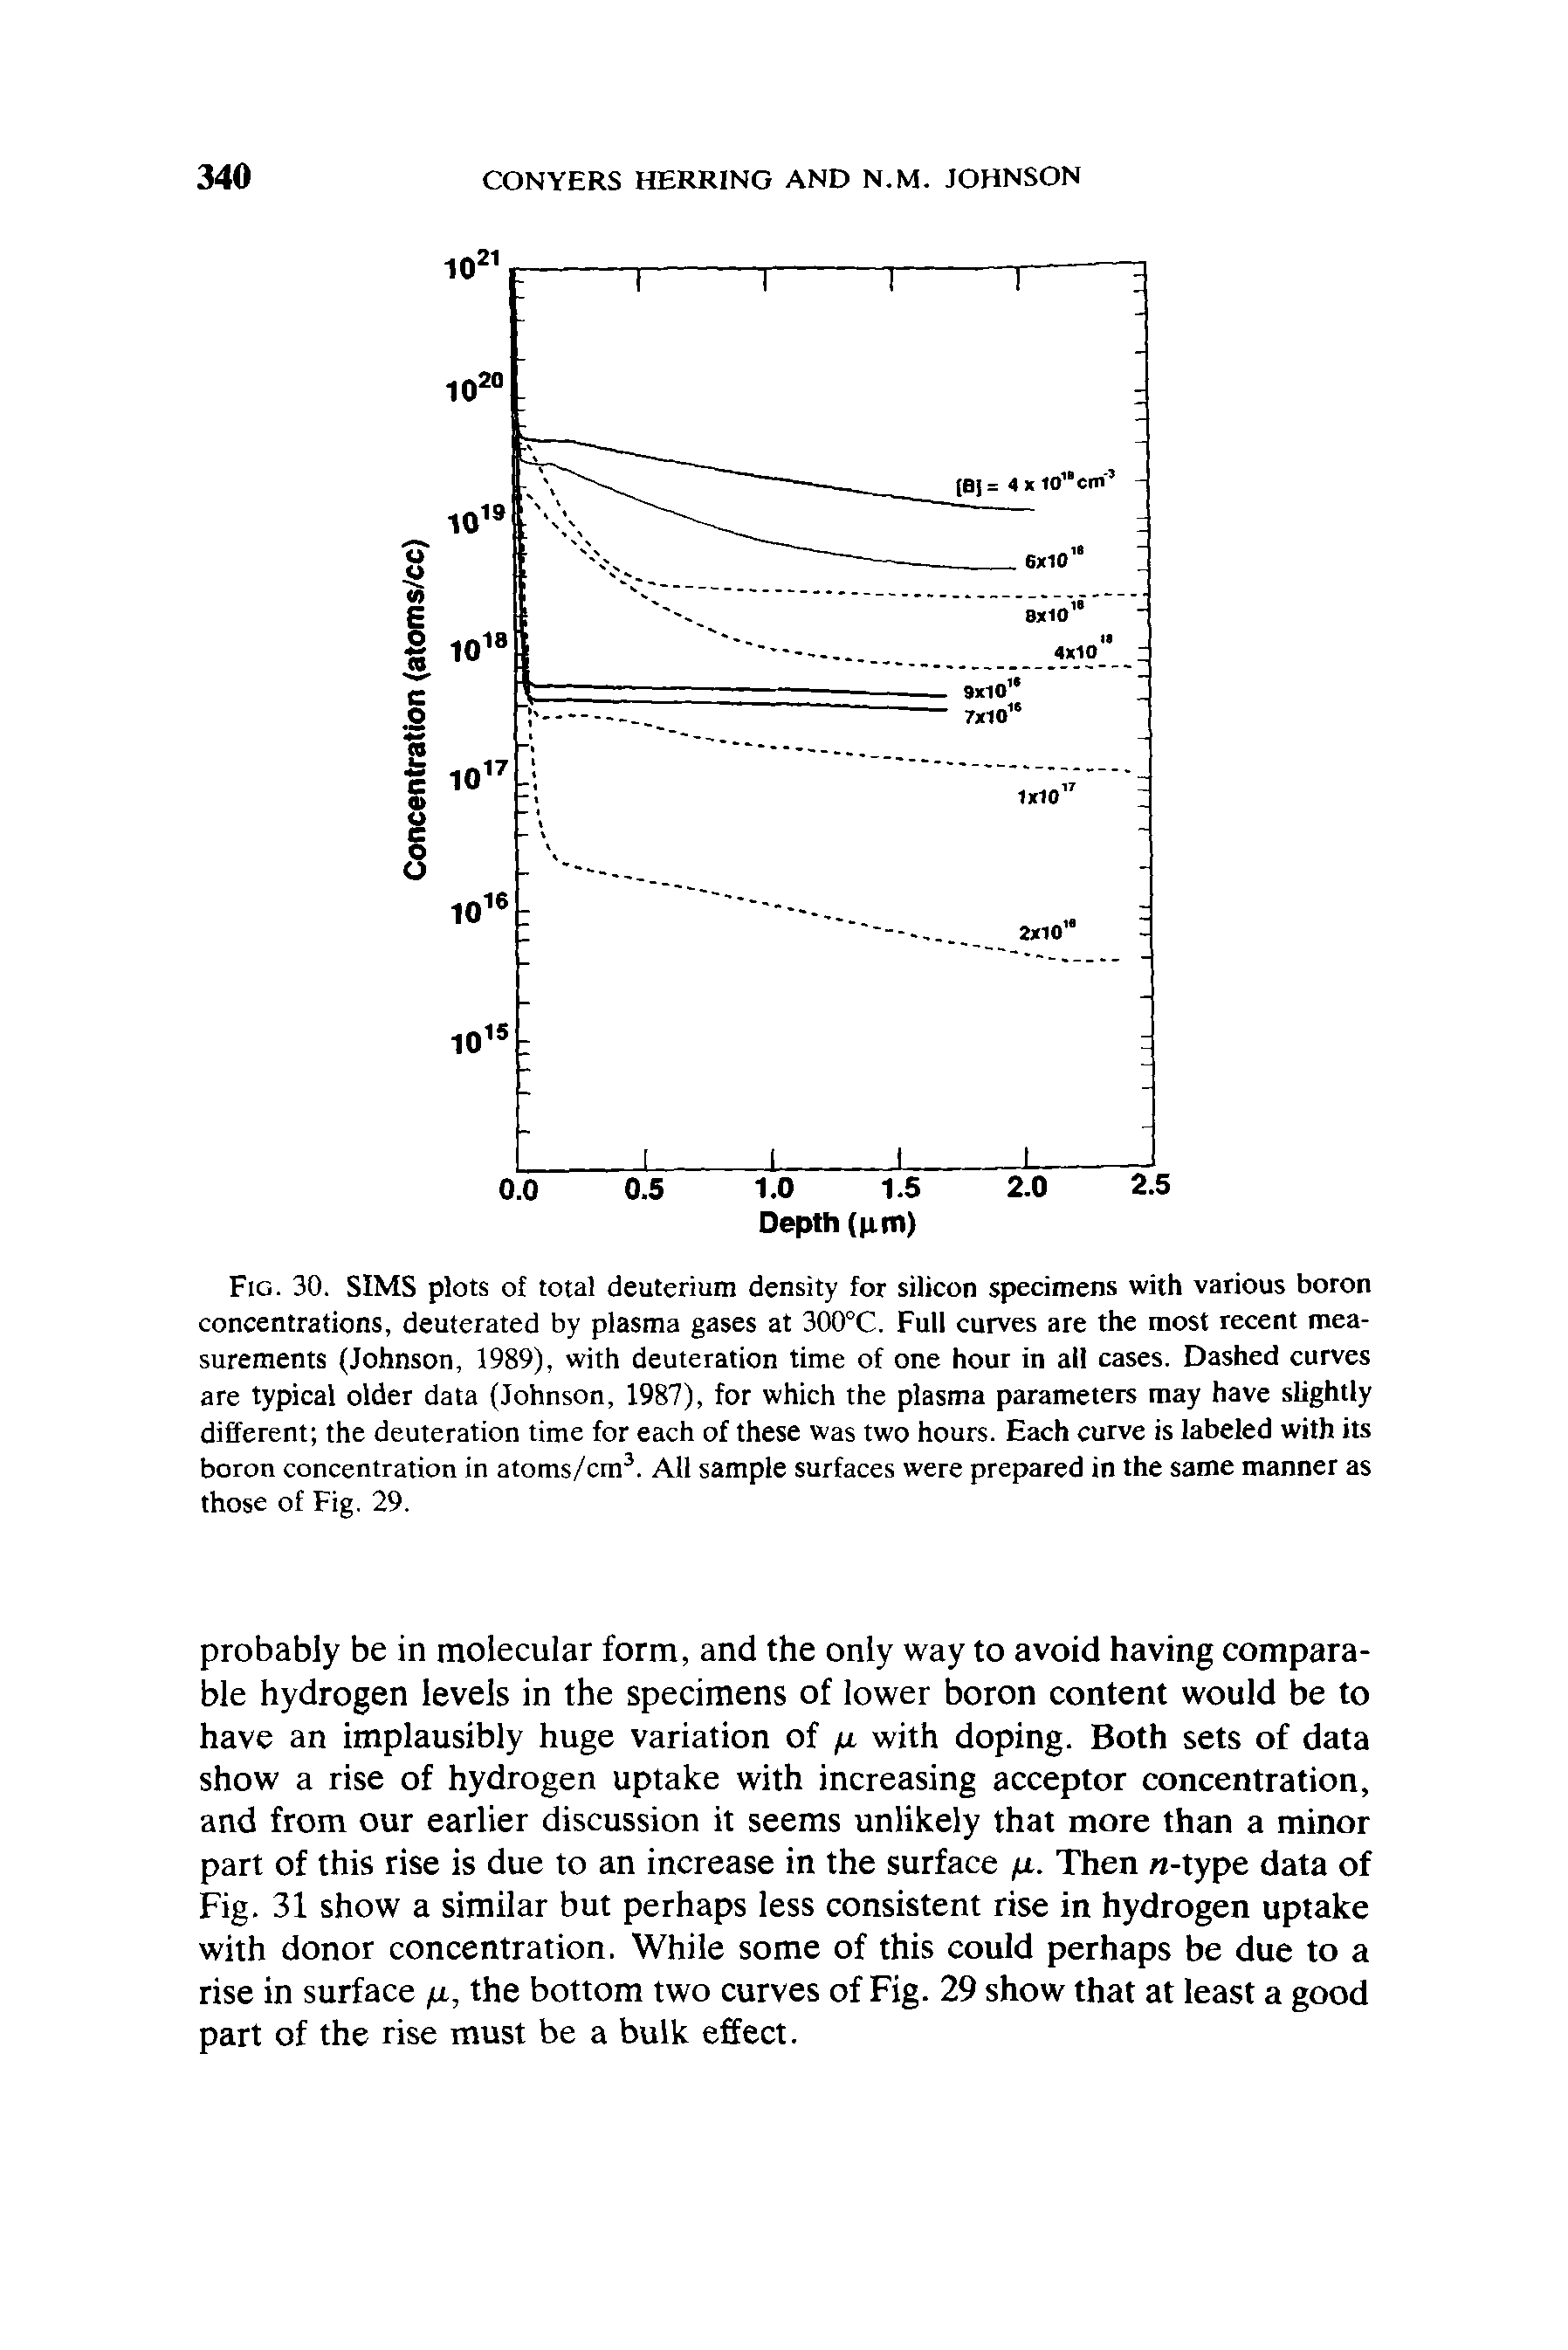 Fig. 30. SIMS plots of total deuterium density for silicon specimens with various boron concentrations, deuterated by plasma gases at 300°C. Full curves are the most recent measurements (Johnson, 1989), with deuteration time of one hour in all cases. Dashed curves are typical older data (Johnson, 1987), for which the plasma parameters may have slightly different the deuteration time for each of these was two hours. Each curve is labeled with its boron concentration in atoms/cm3. All sample surfaces were prepared in the same manner as those of Fig. 29.